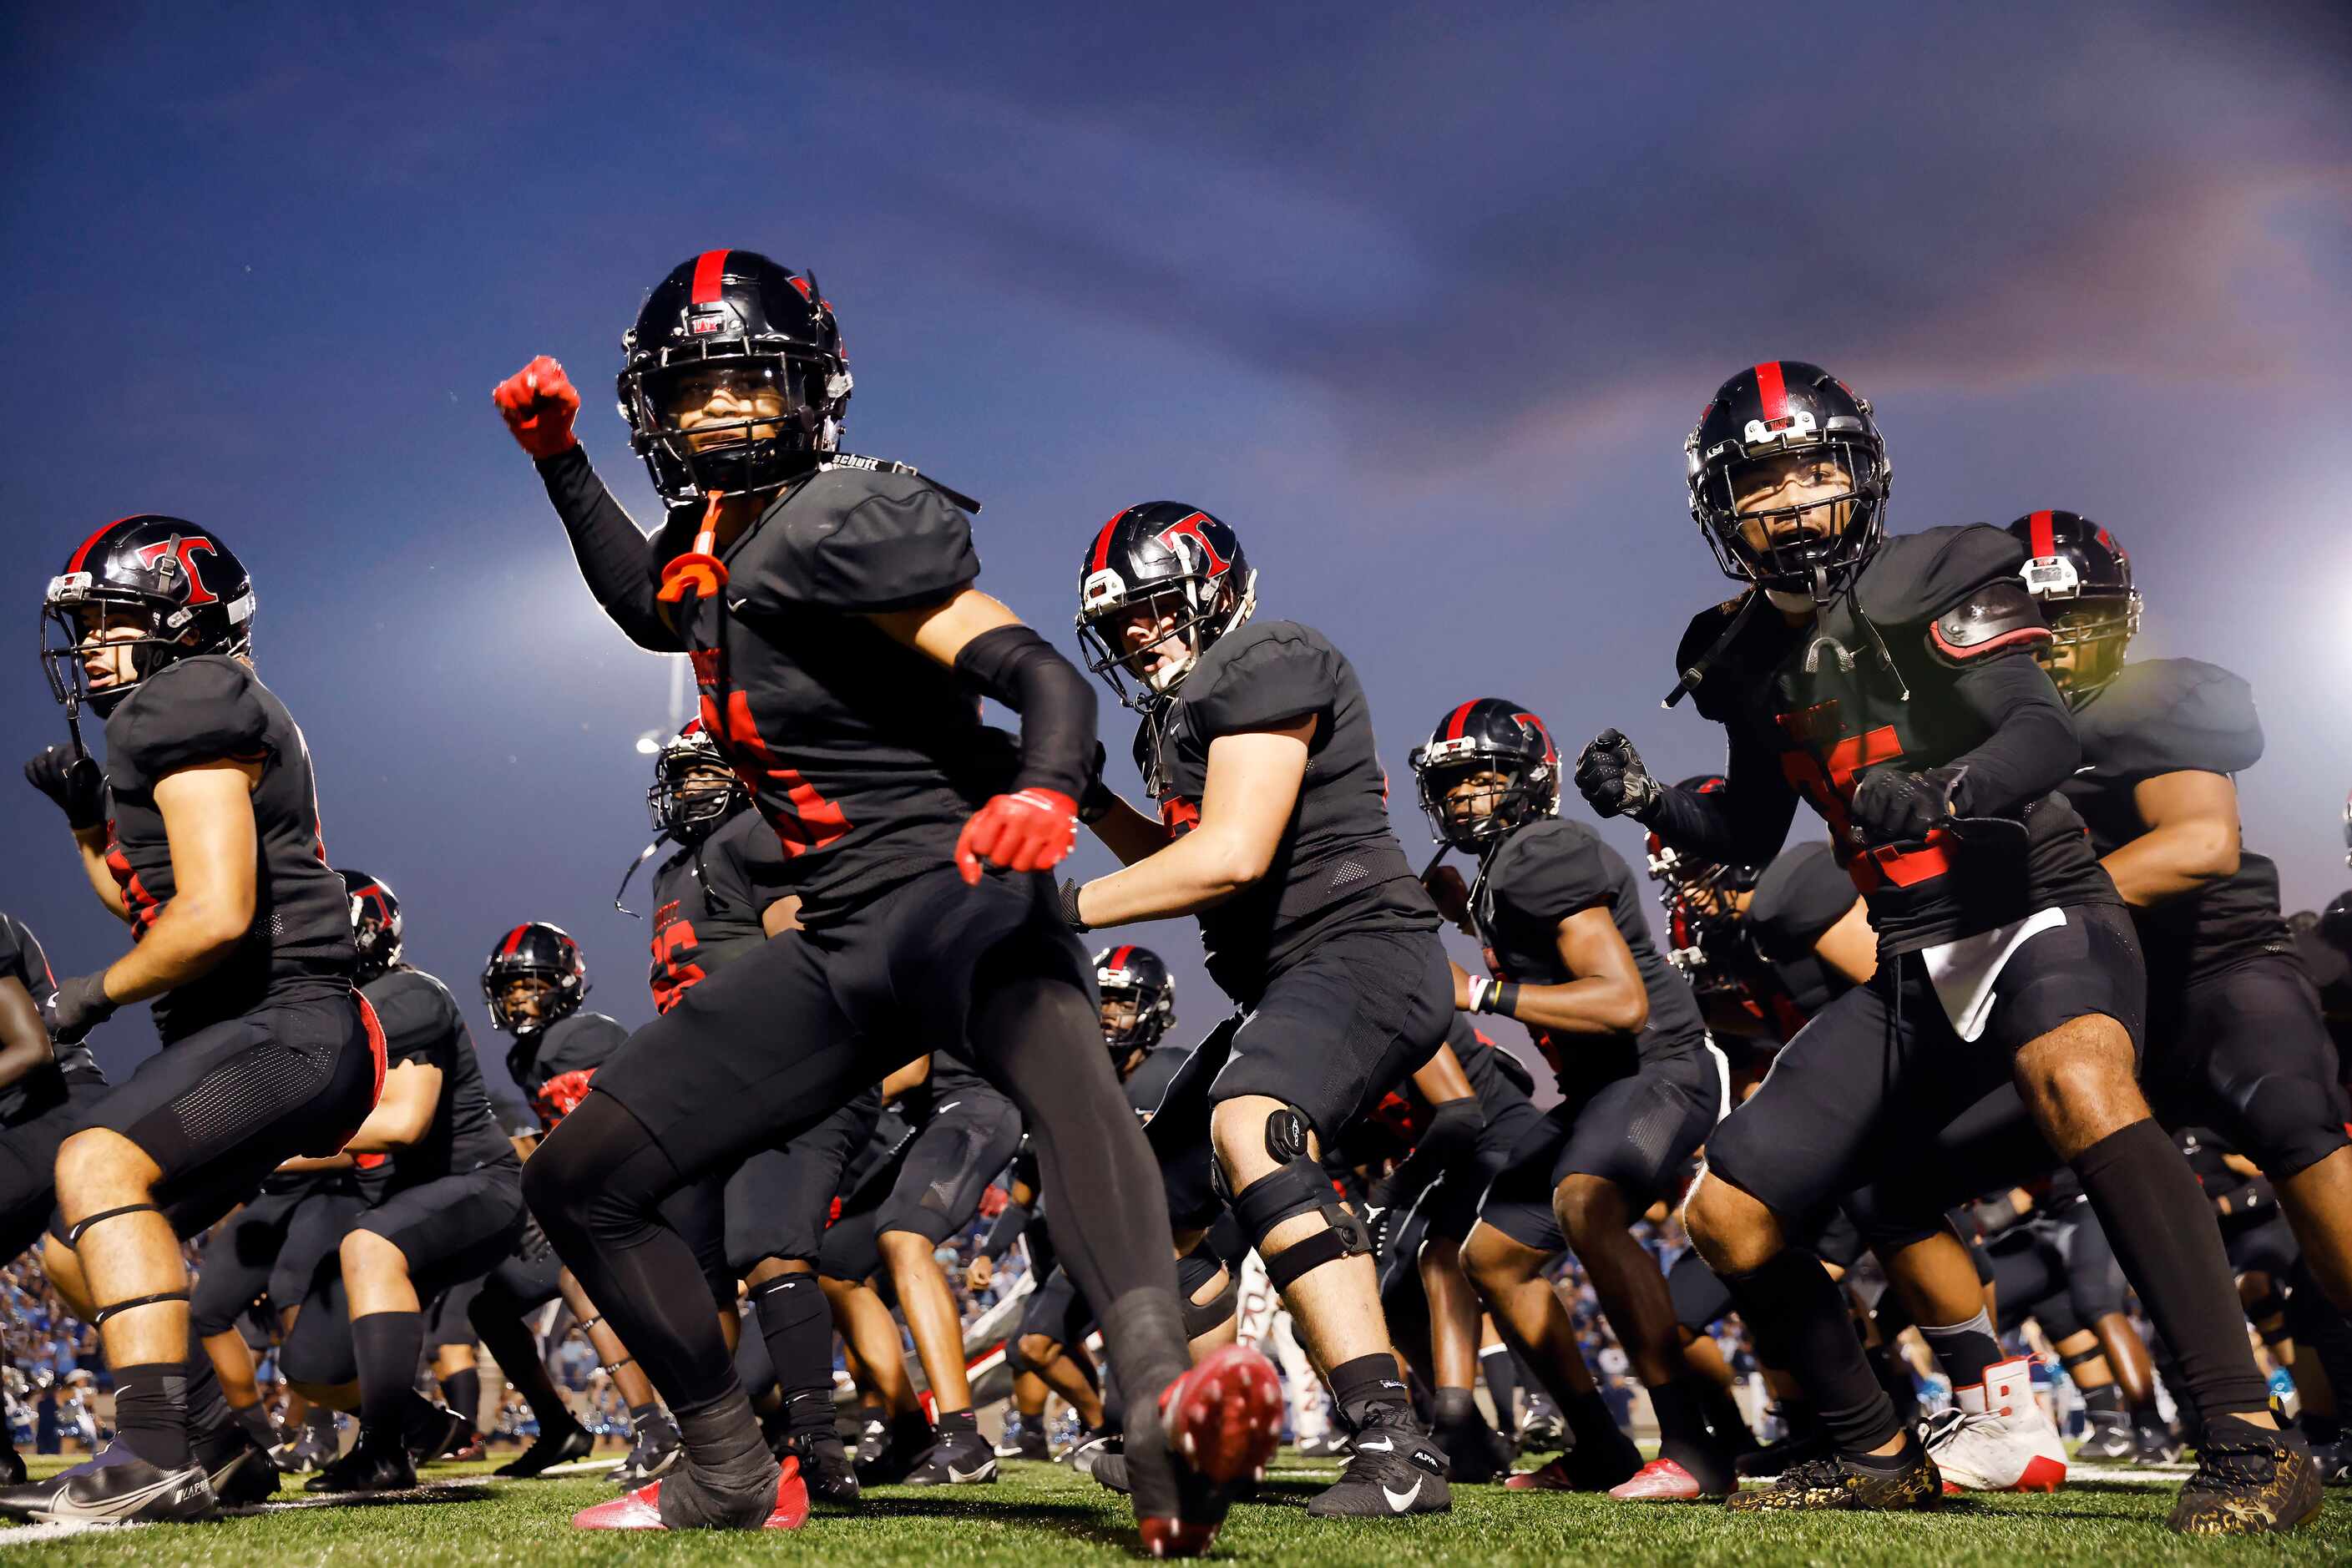 Euless Trinity football players, including Tyson Thomas (21, center) and Jessie Bosier (35),...